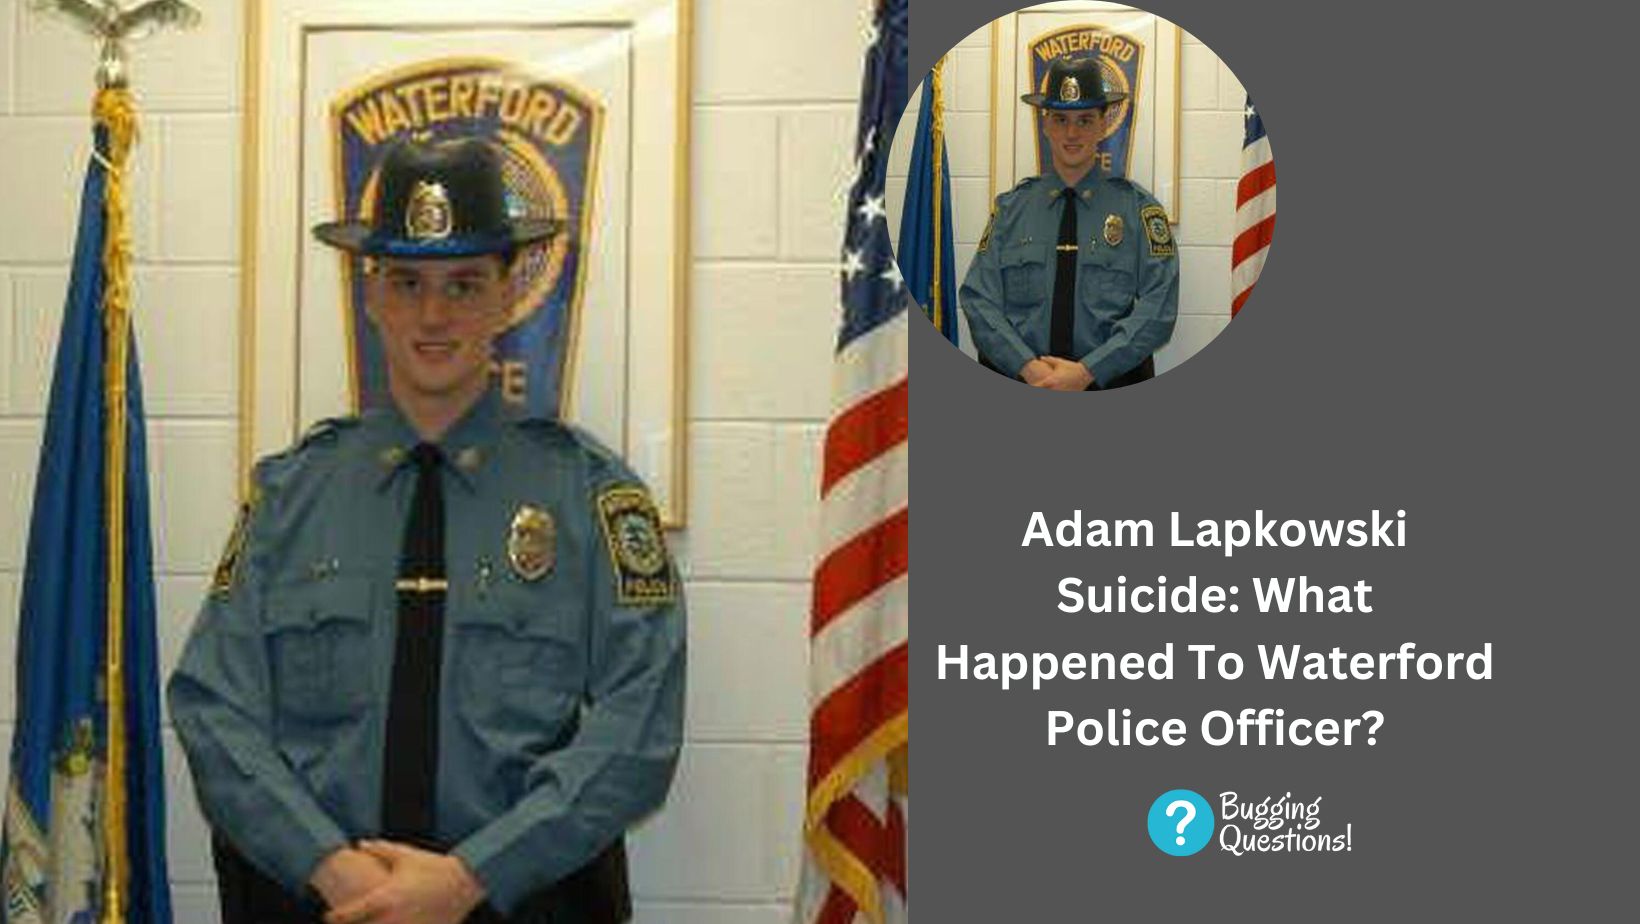 Adam Lapkowski Suicide: What Happened To Waterford Police Officer?